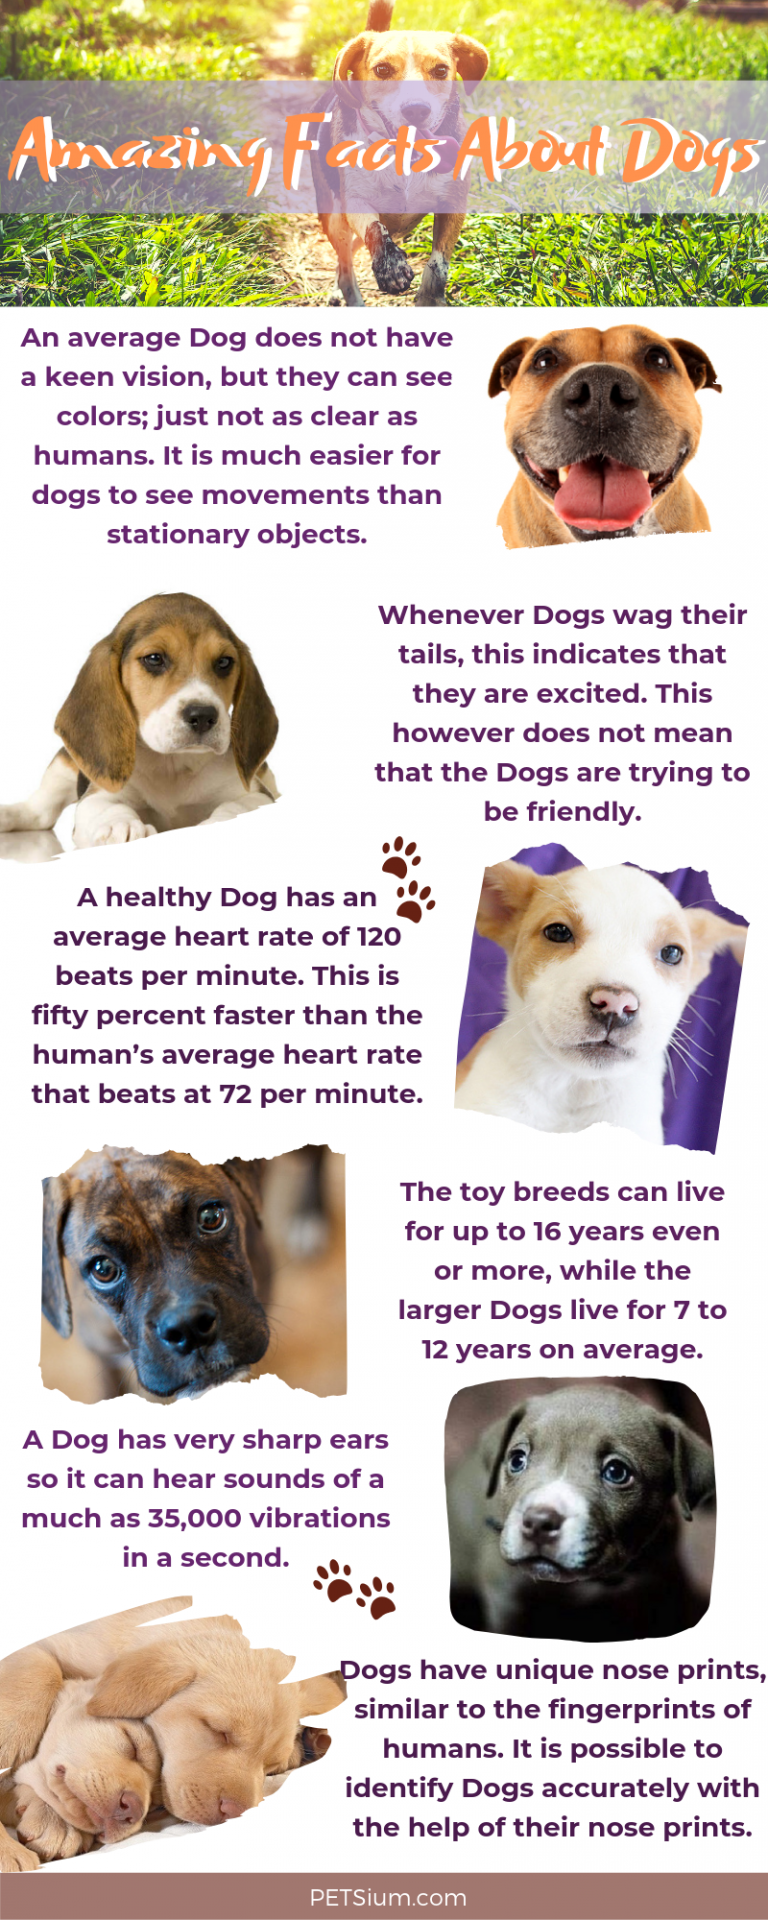 What Are Interesting Facts About Dogs Infographic 768x1920 